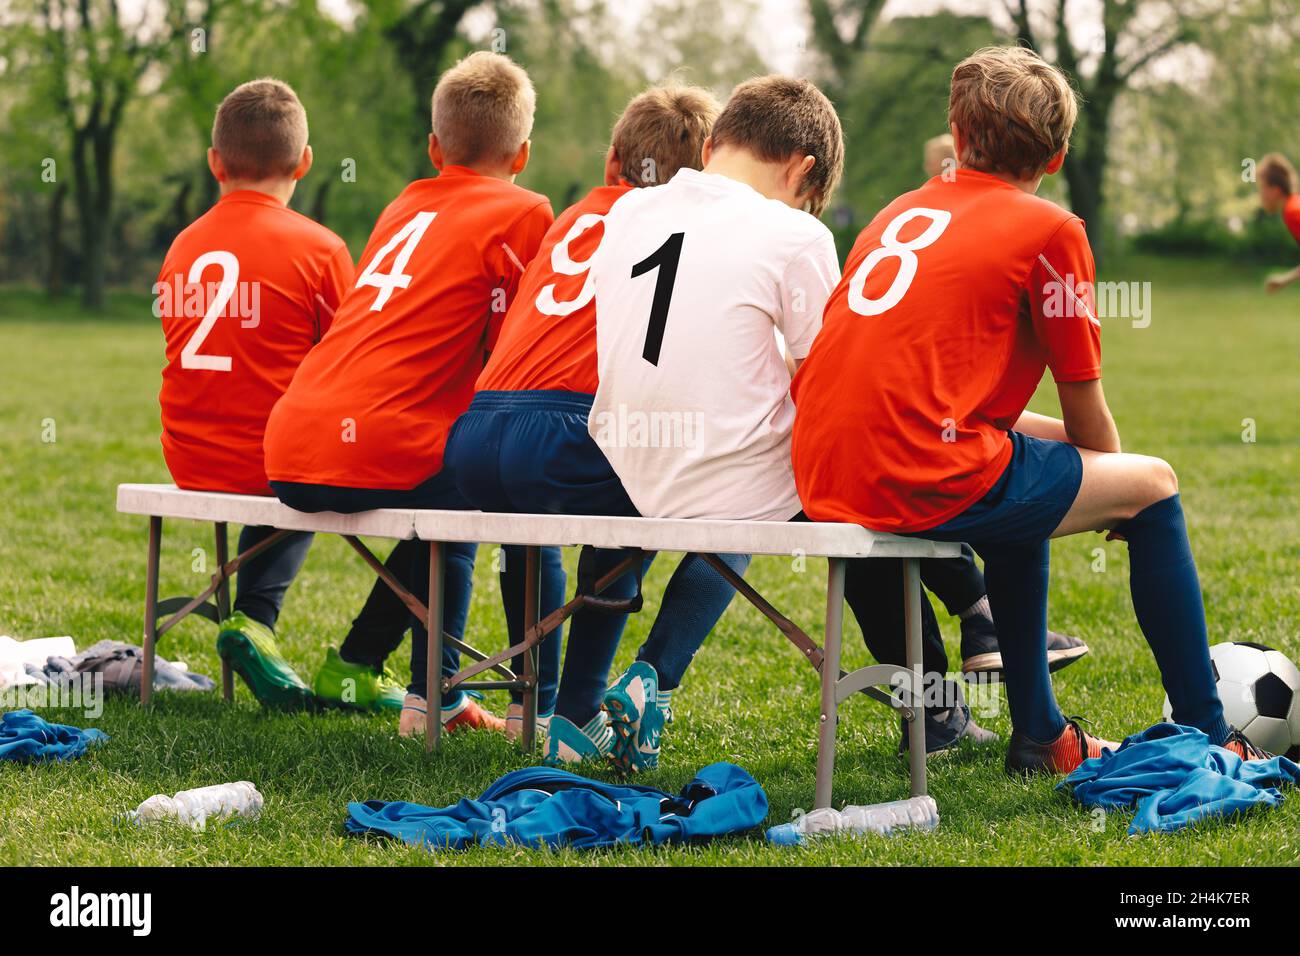 Happy Friends in Sports Team. Group of Young Boys Kicking Sports Soccer Game on  Grass Pitch. School Boys Sitting on Sideline Substitute Bench. School Stock Photo